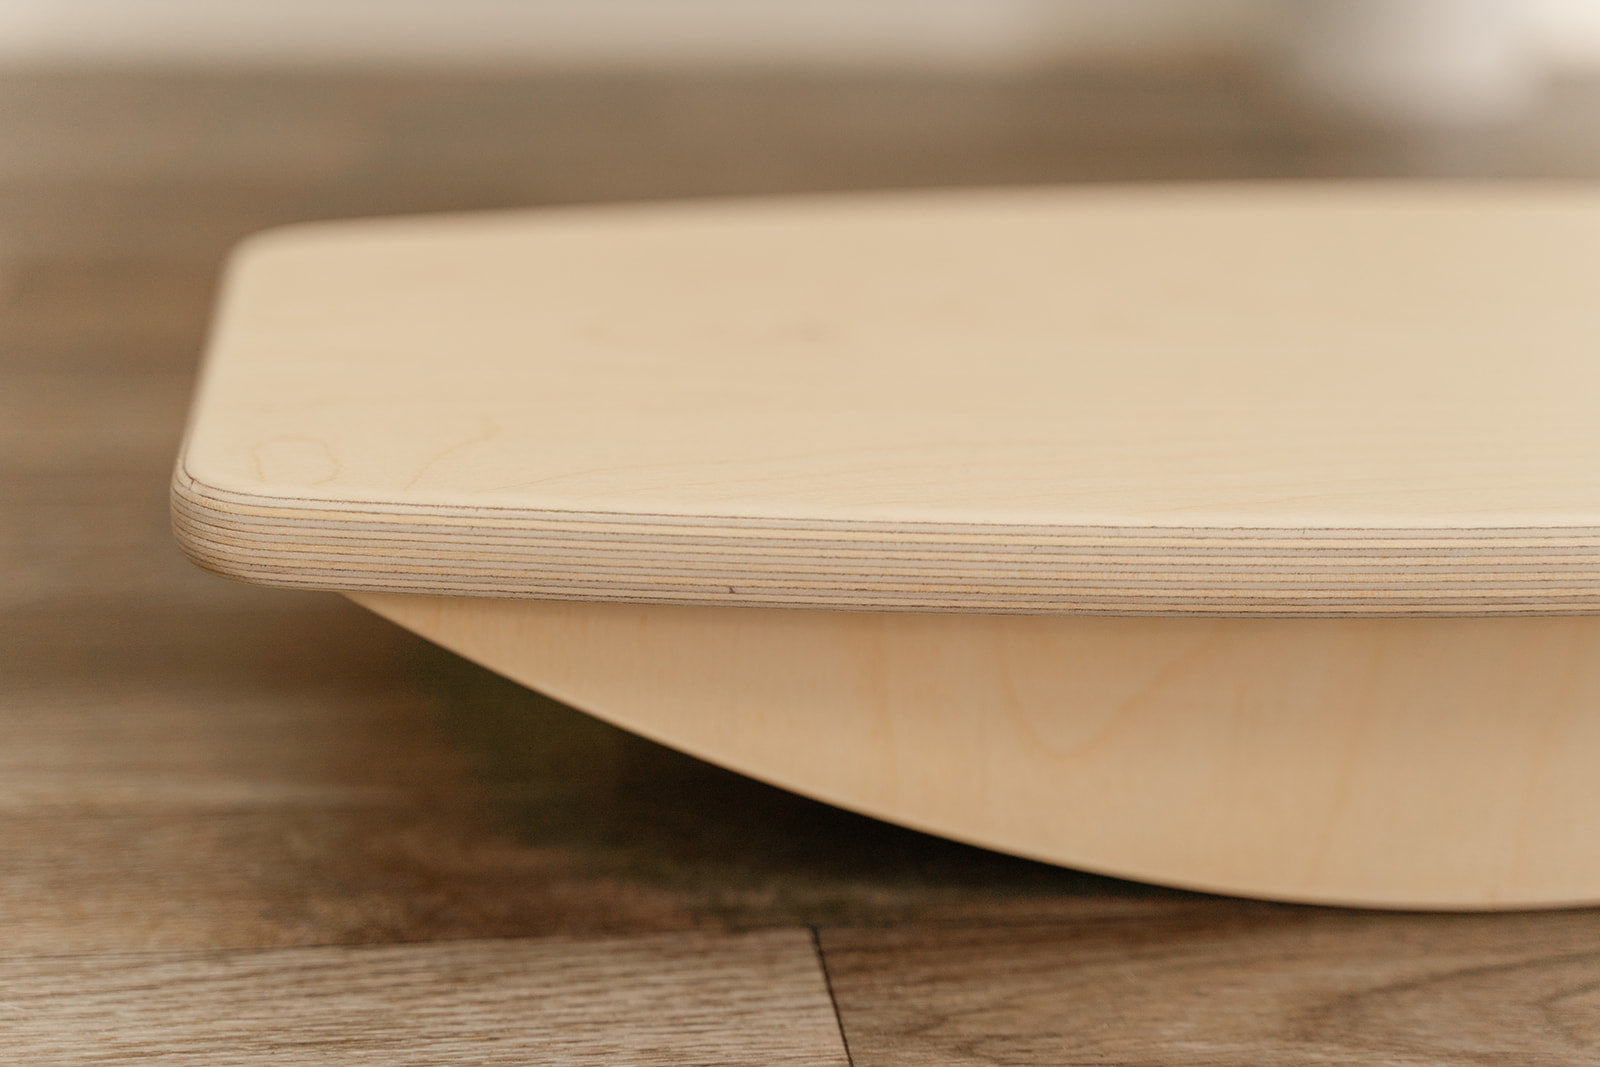 Balance board edge profiles featuring attractive wooden grain and smooth corners